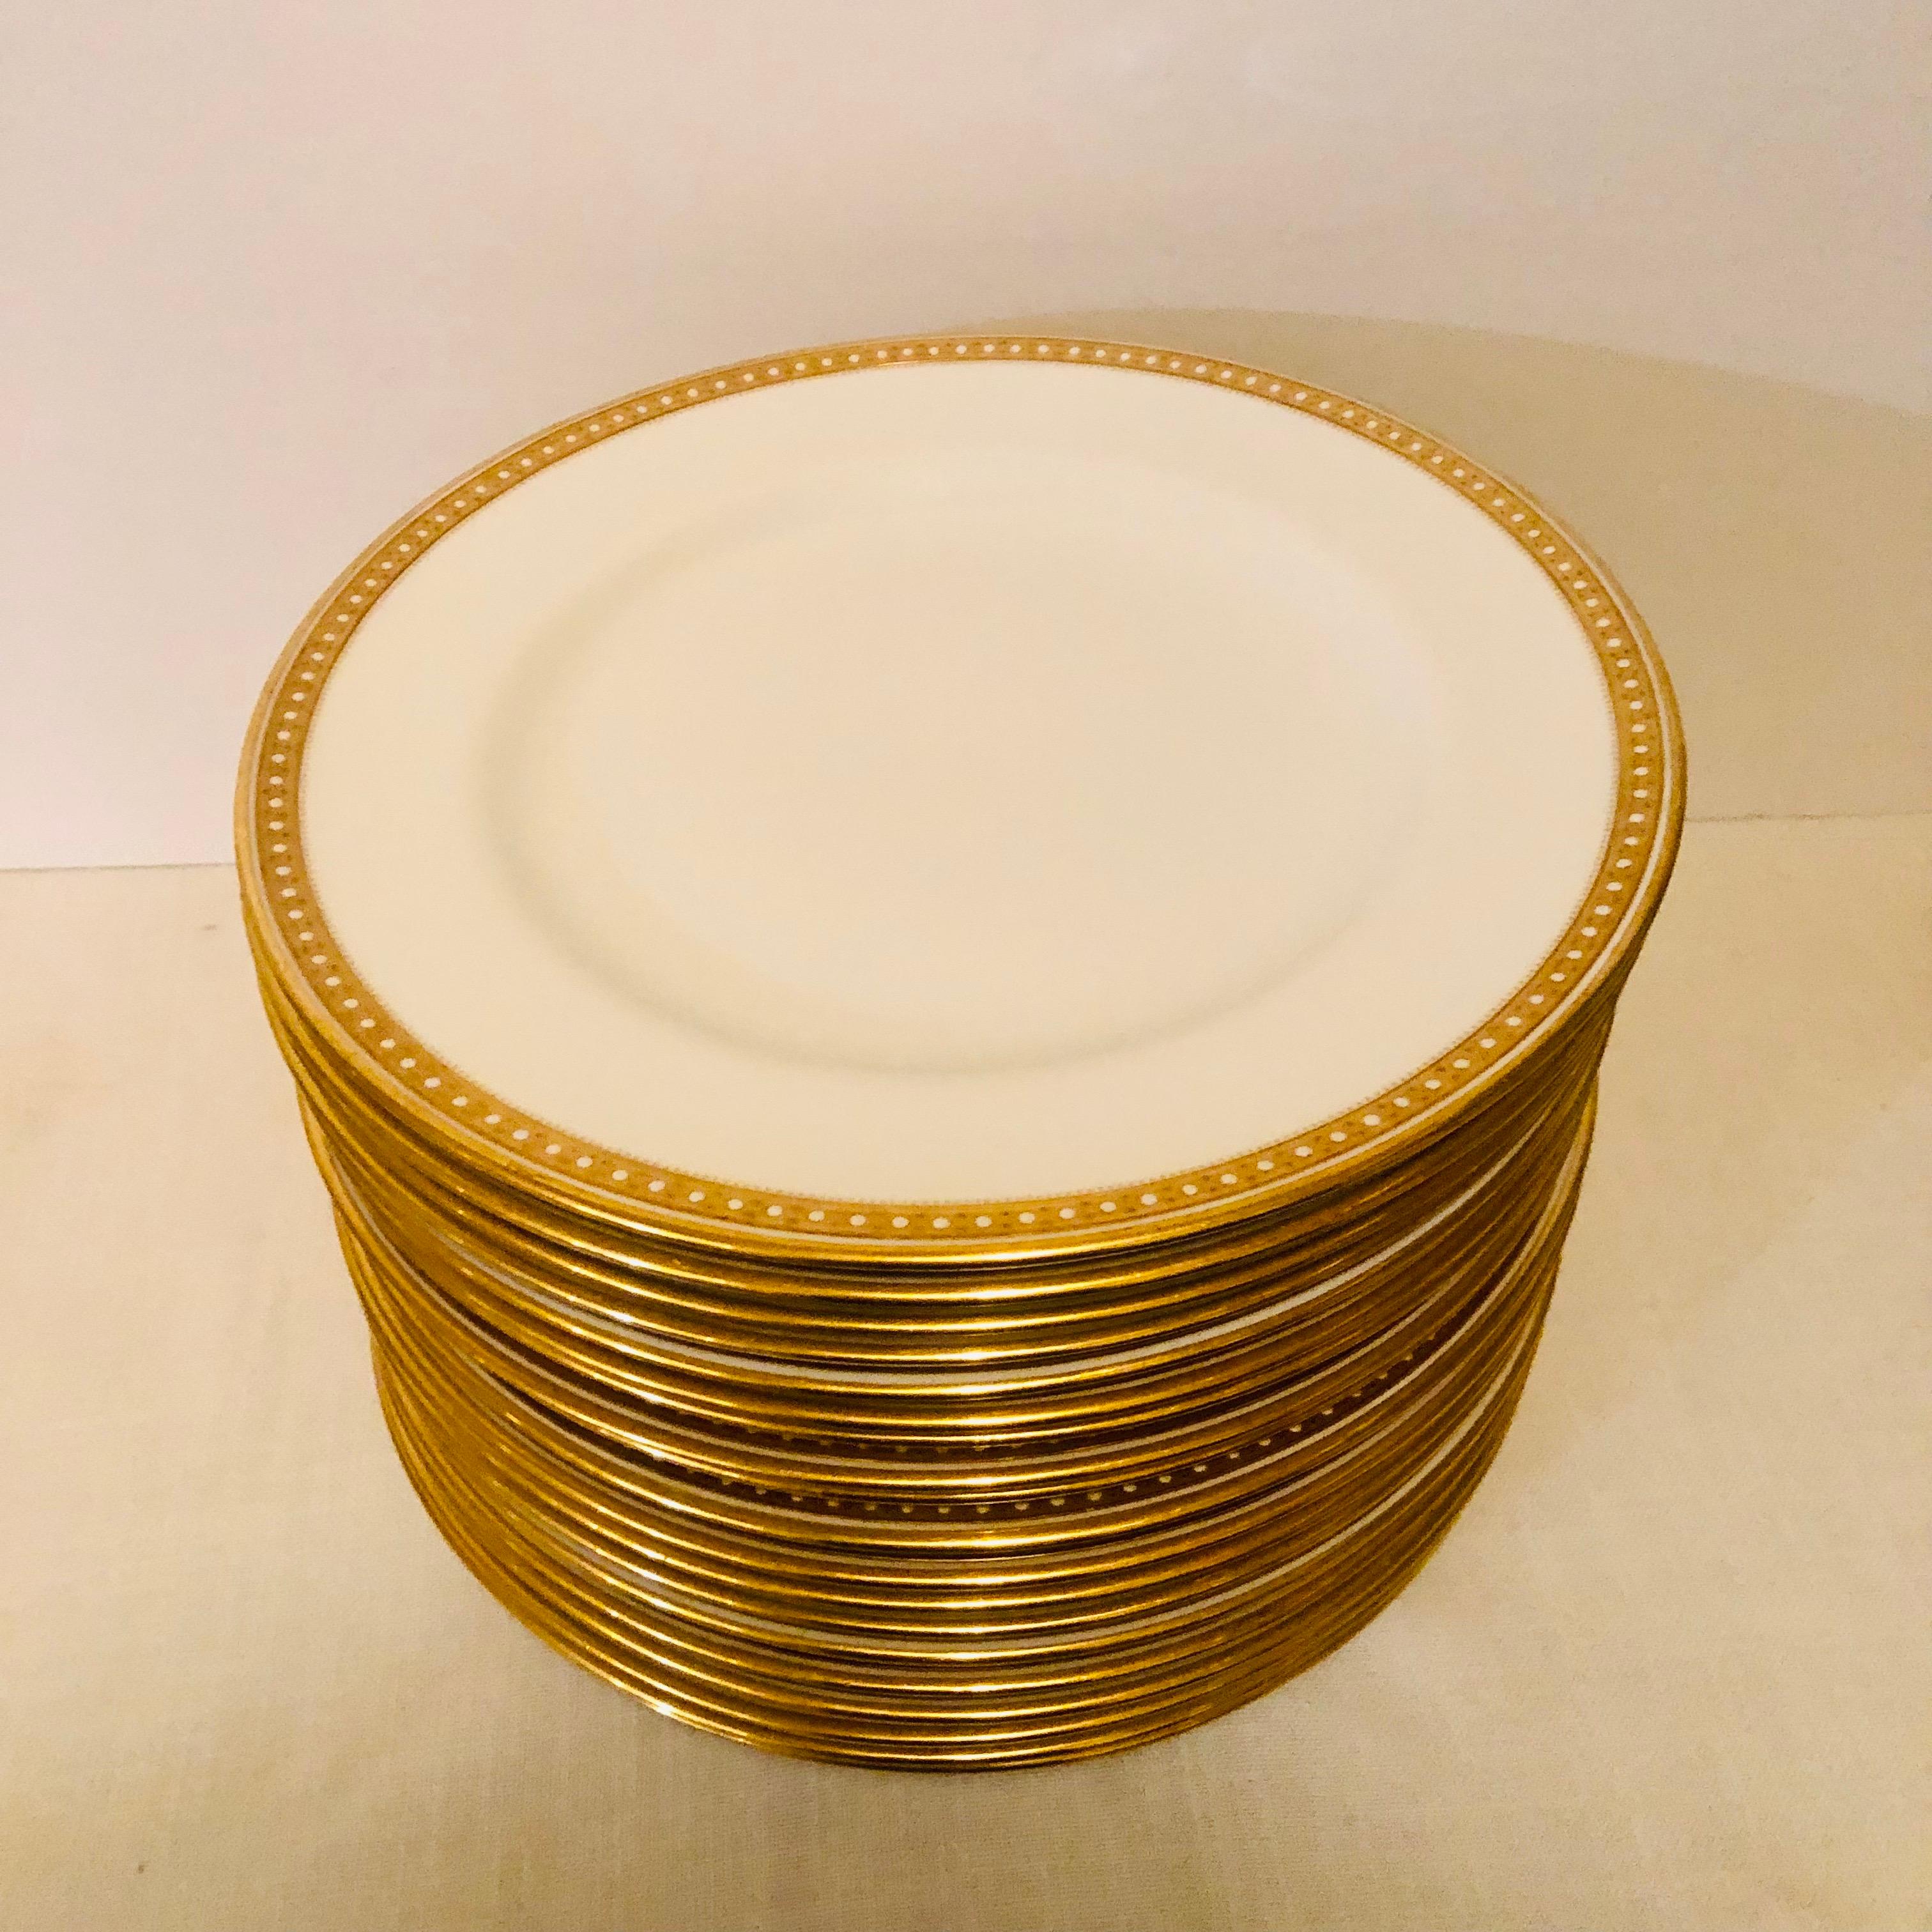 Neoclassical Set of 19 Copeland Spode Dinner Plates With Gold Borders and White Jeweling 